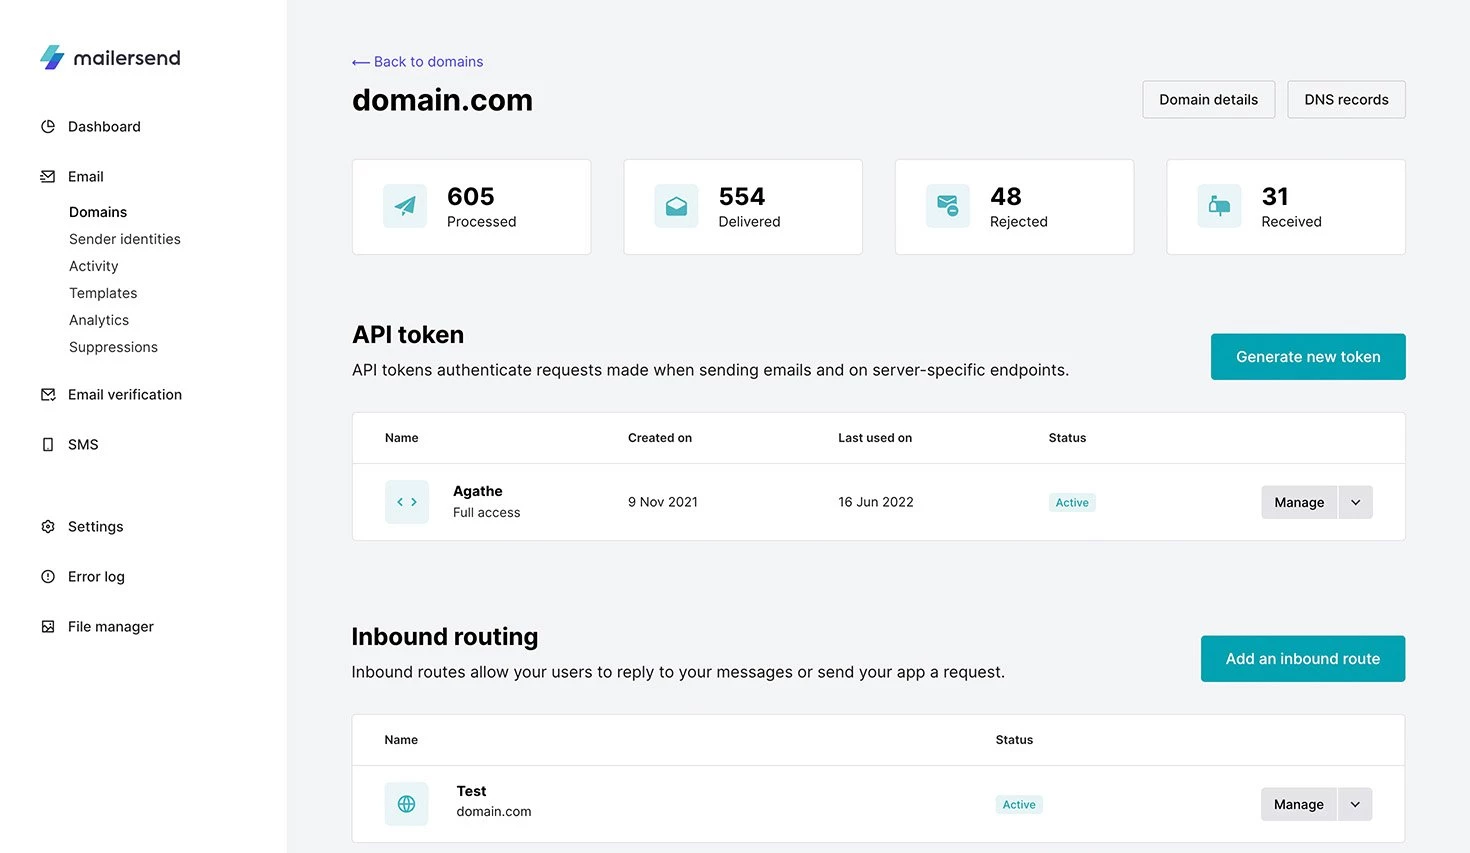 The API tokens section on the domain page of MailerSend.